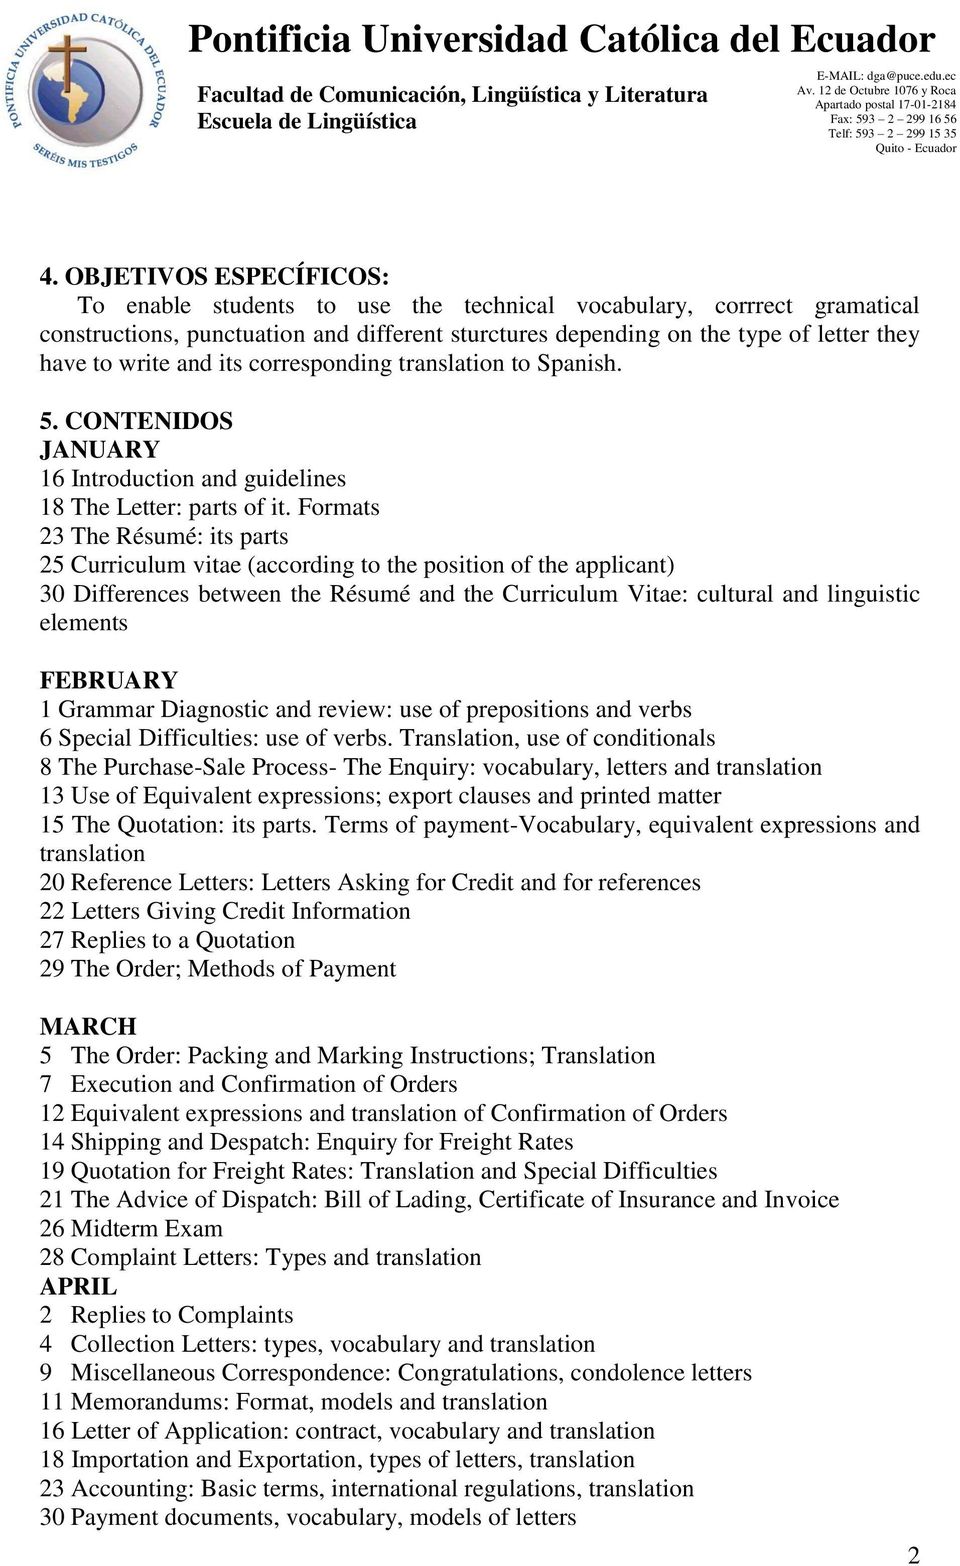 Formats 23 The Résumé: its parts 25 Curriculum vitae (according to the position of the applicant) 30 Differences between the Résumé and the Curriculum Vitae: cultural and linguistic elements FEBRUARY